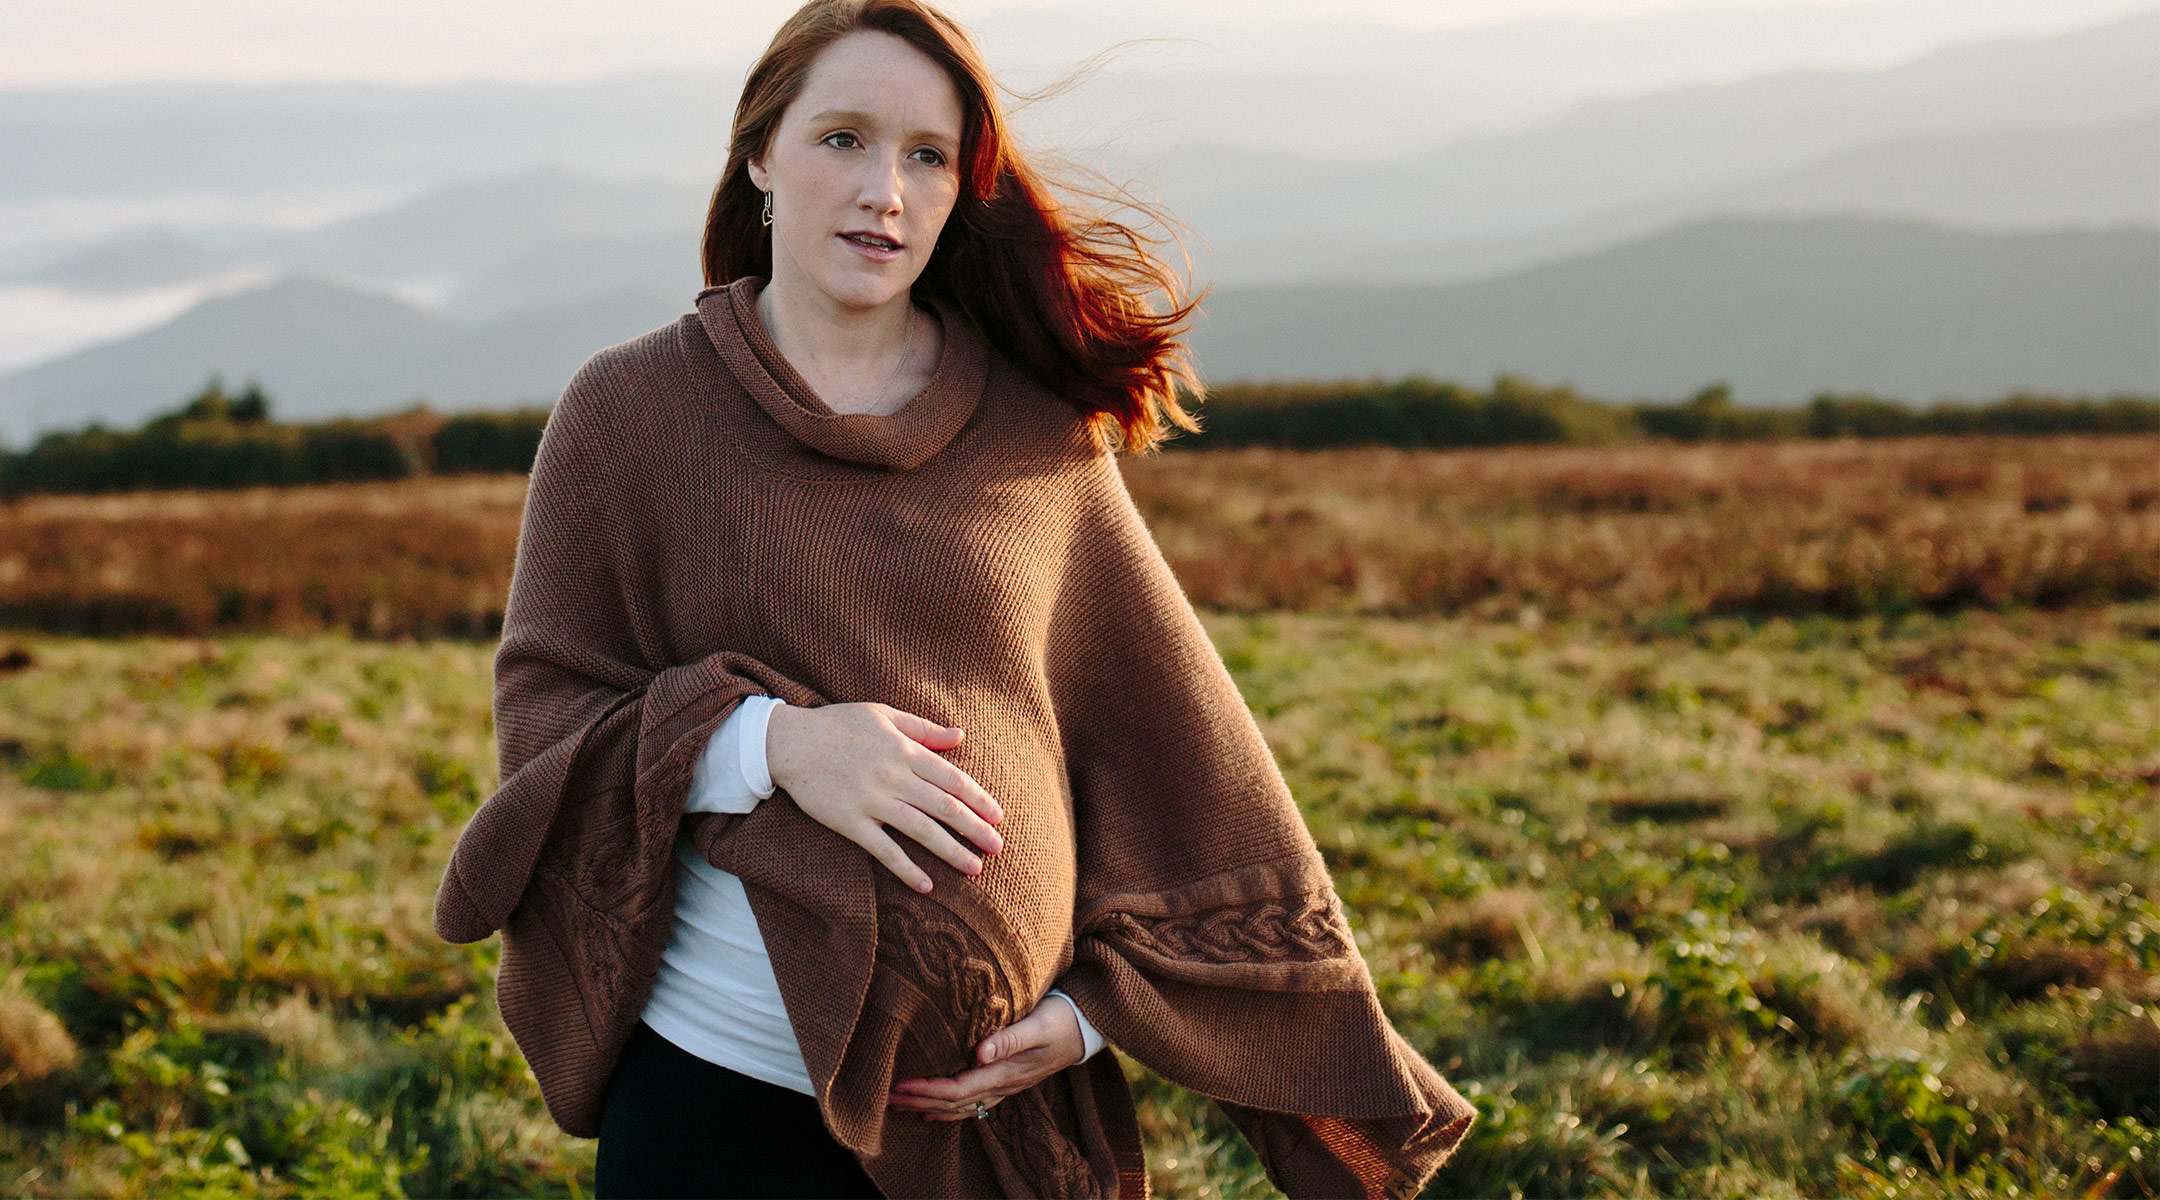 pregnant woman outside near mountains in cold weather